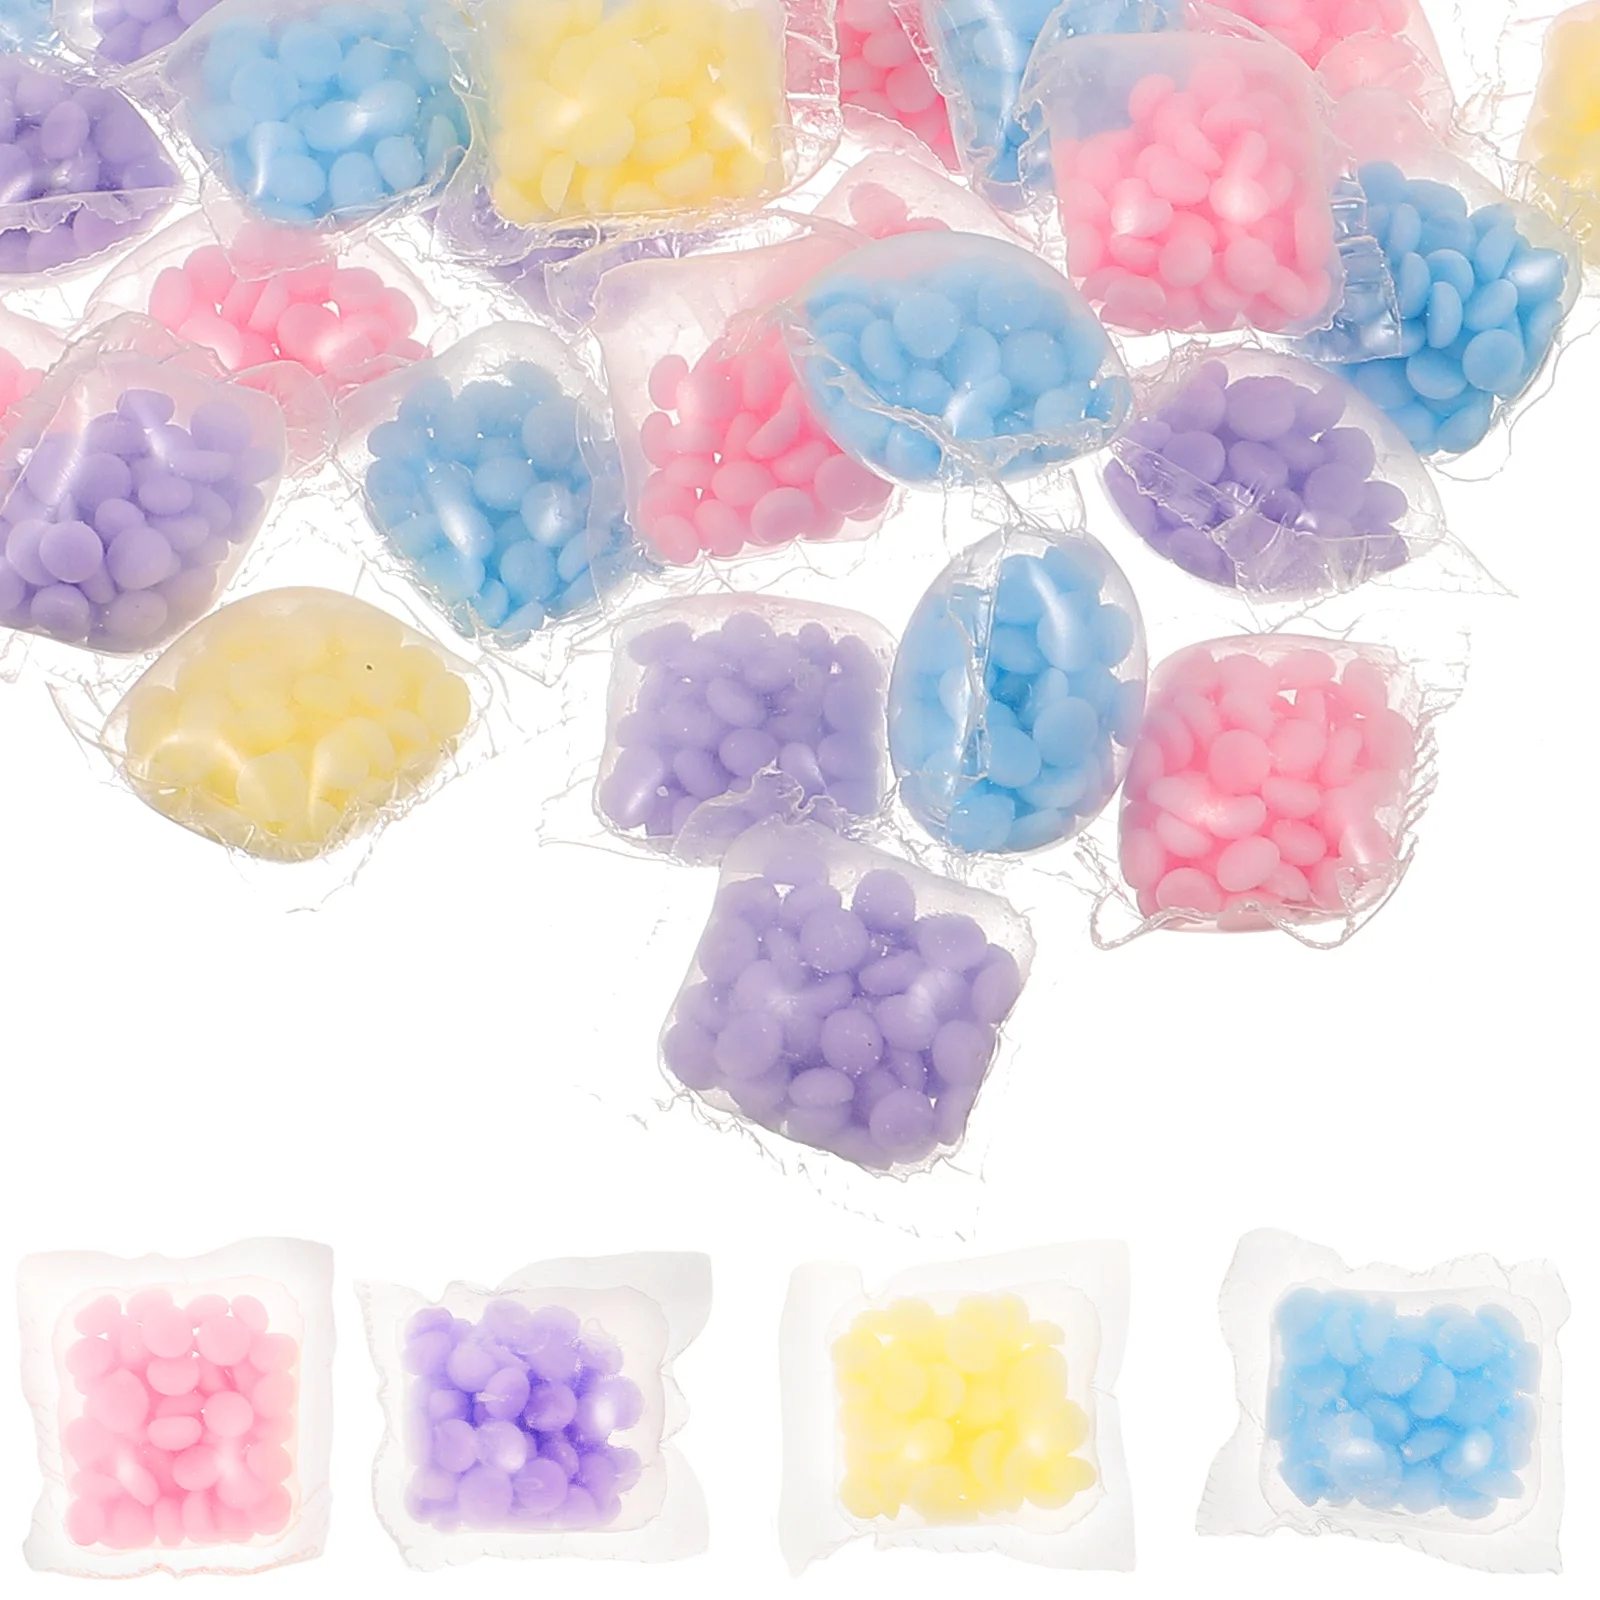 

50pcs 6g Home Laundry Beads Concentrated Laundry Cleaning Tools (Assorted Color) Perfume for linen